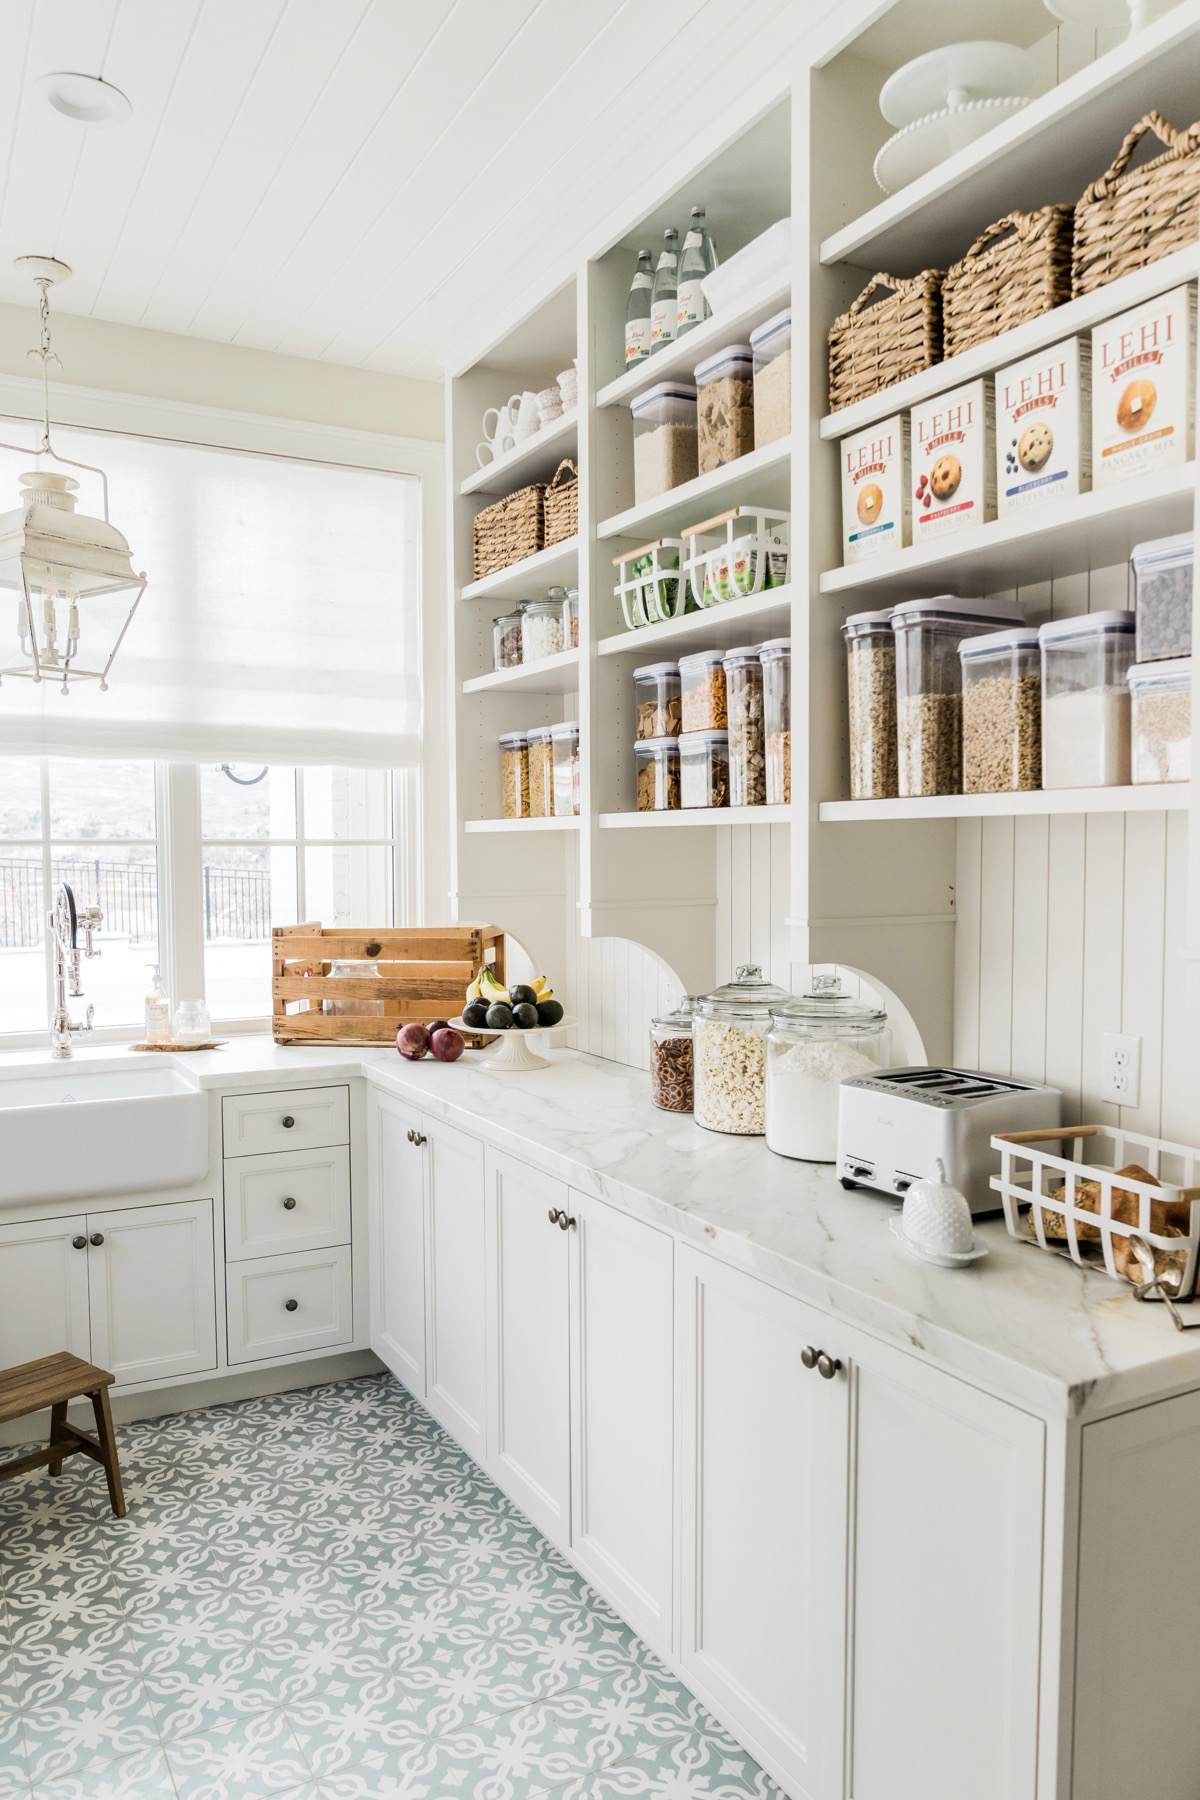 I gathered my absolute favorite pantry design and organization inspiration. Because, as a mother of five and having a large family, the pantry is kind of one of those areas of the house that has to be approached with strategy, you know? Not to mention, a pretty pantry just feels good. Catch it all along with my favorite finds for organizing your pantry on KaraLayne.com!